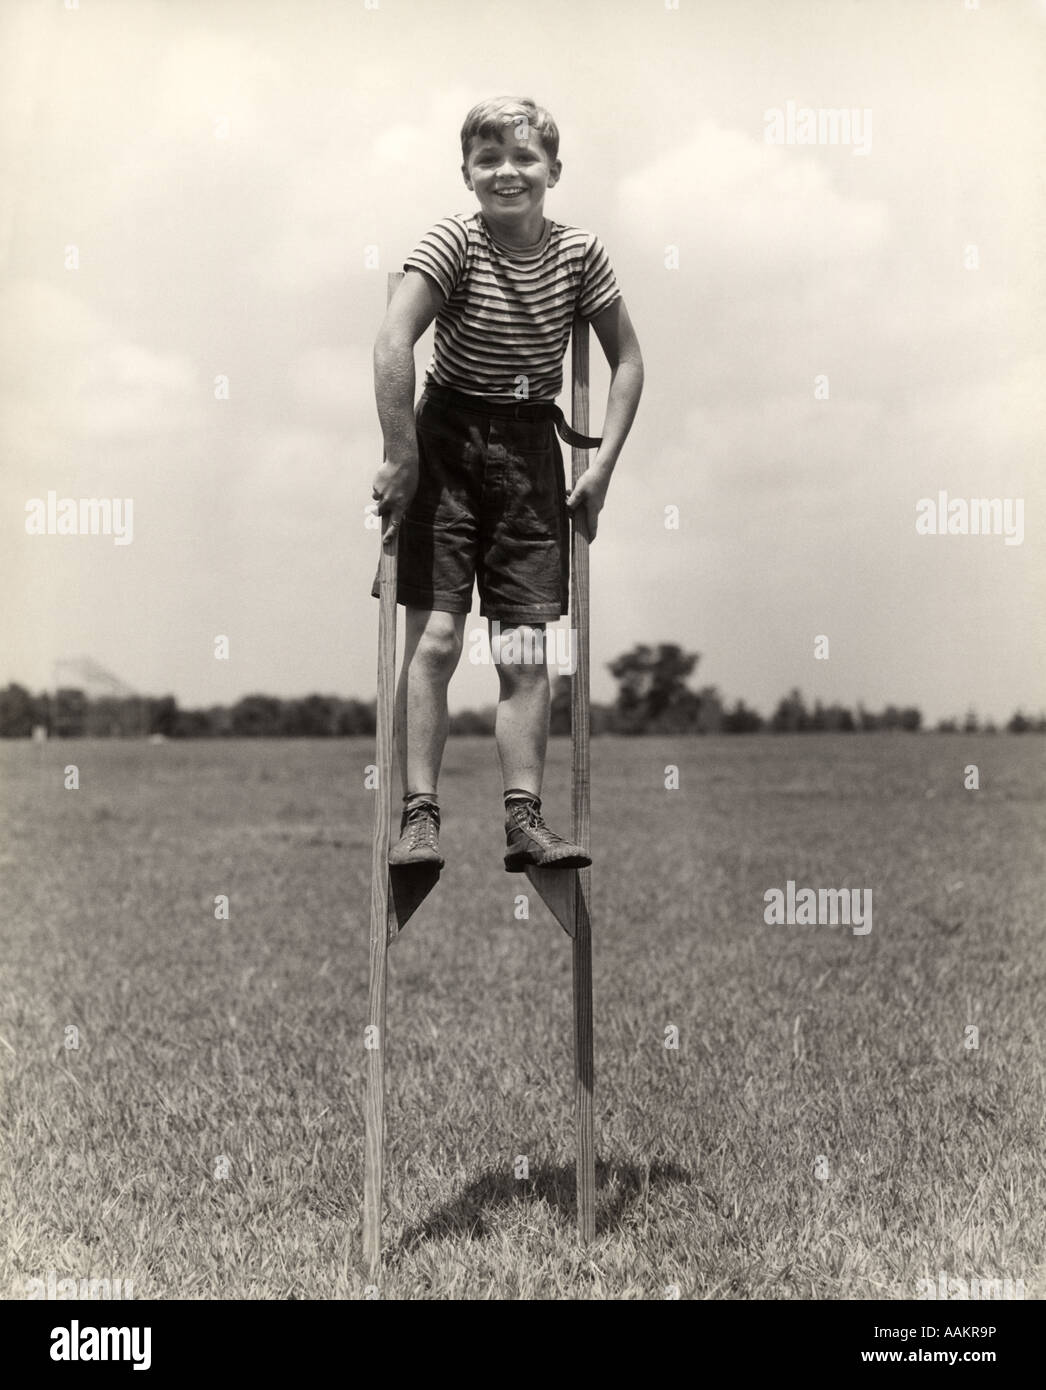 1930s 1940s SMILING HAPPY BOY WEARING STRIPED SHIRT & SHORT PANTS WALKING ON PAIR OF STILTS LOOKING AT CAMERA Stock Photo